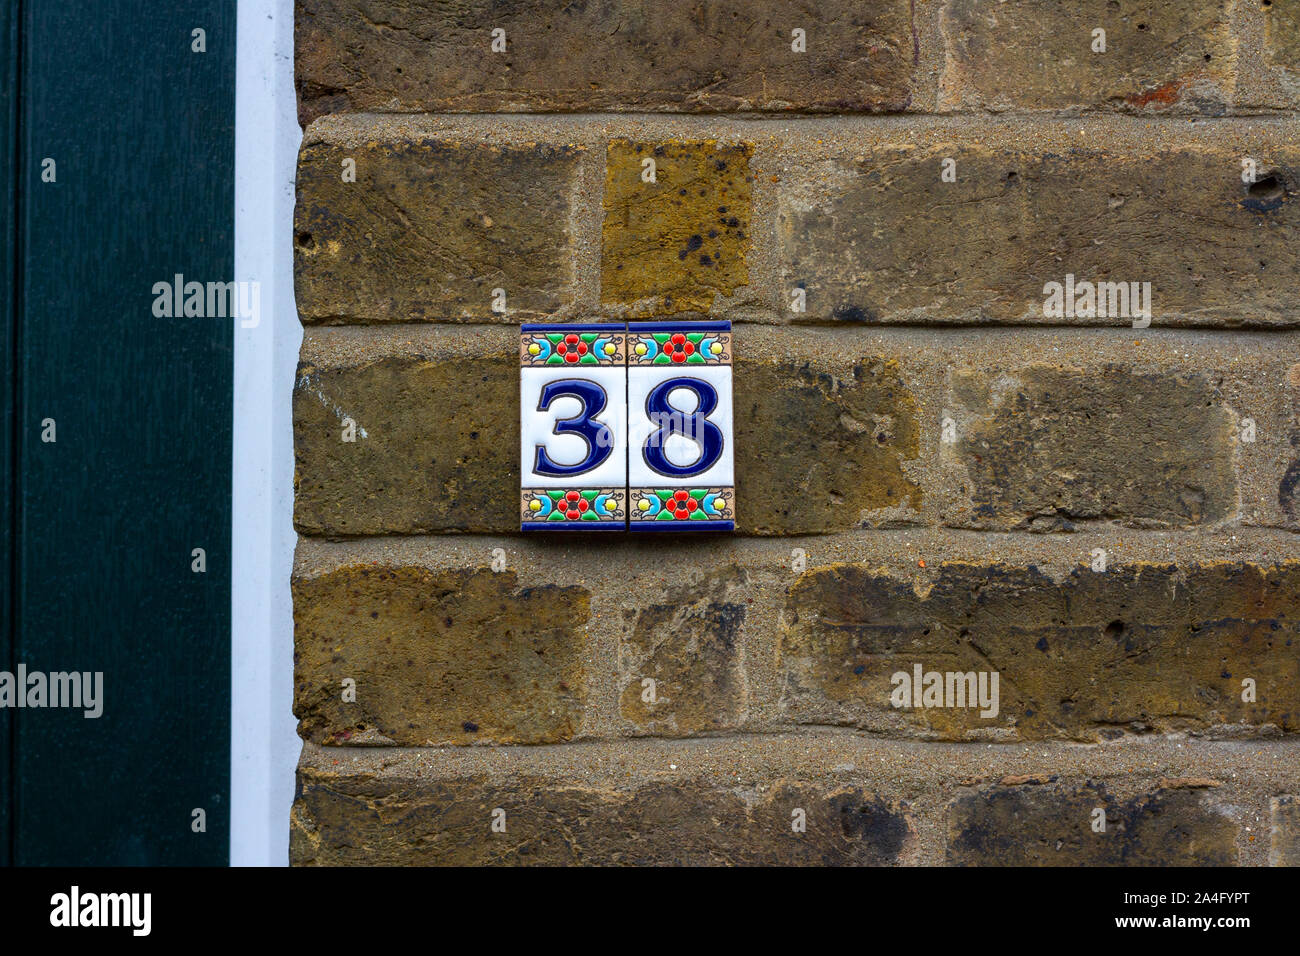 House number 38 in tile on a brick wall Stock Photo